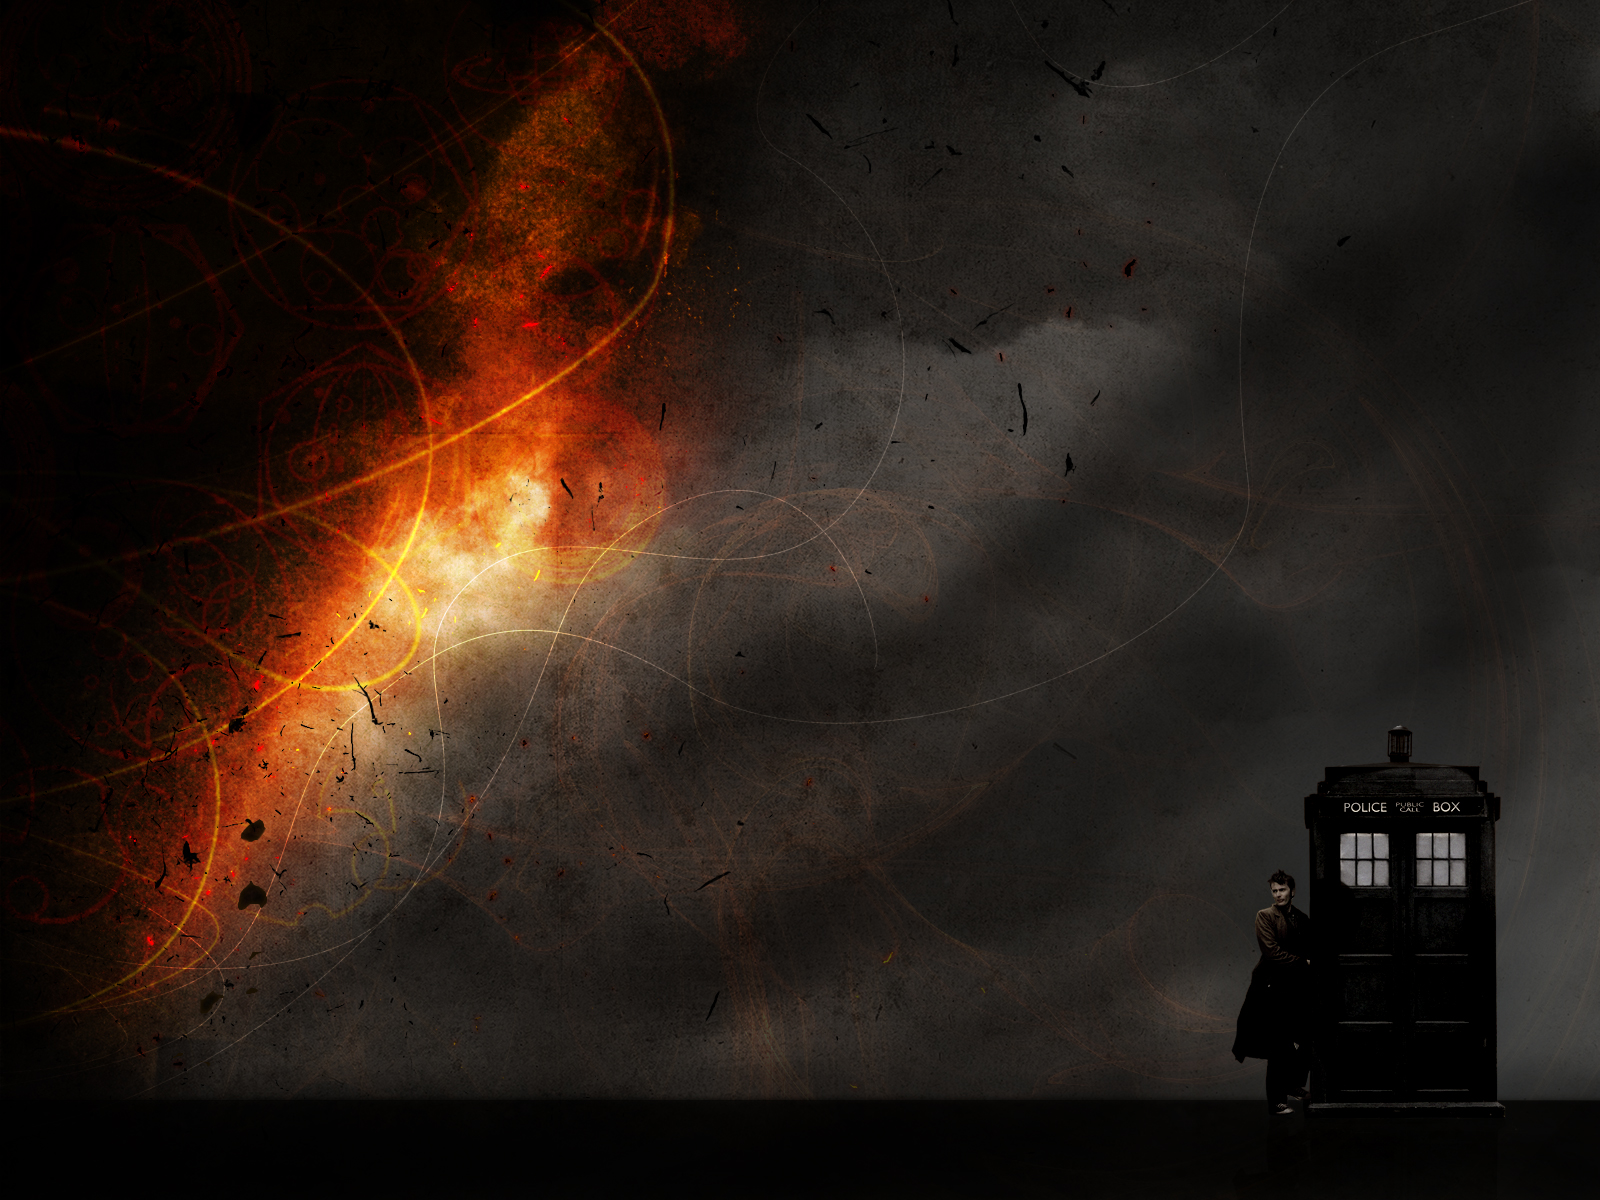 Doctor Who Wallpaper Archives - Page 3 of 16 - WideWallpaper.info ...